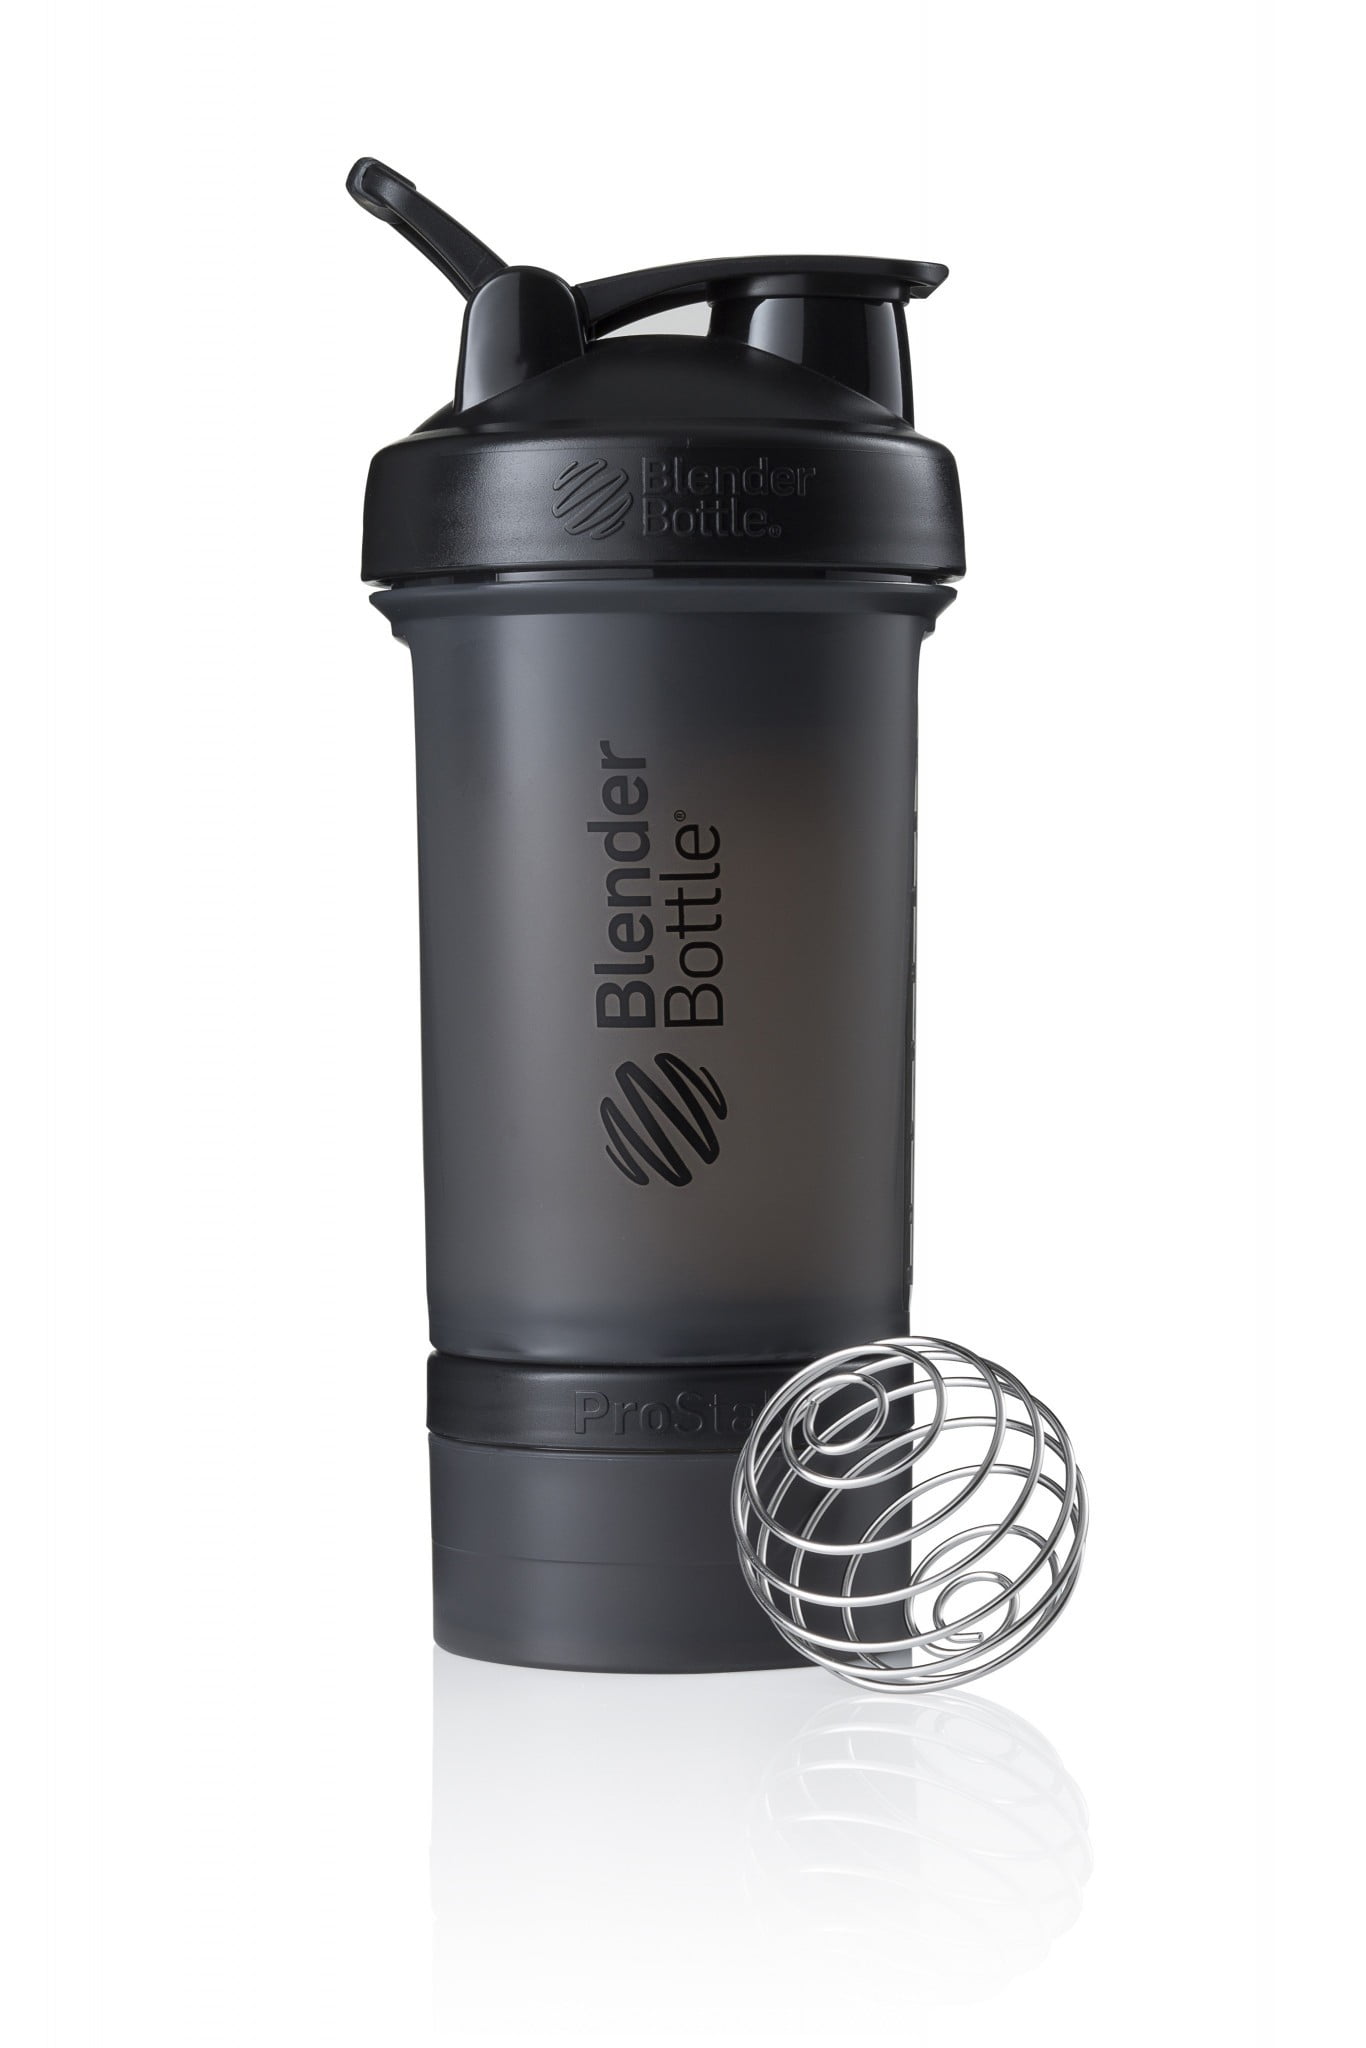 New Blender Bottle Pro Stack. Includes Pill Tray, Jar and Wire Ball.